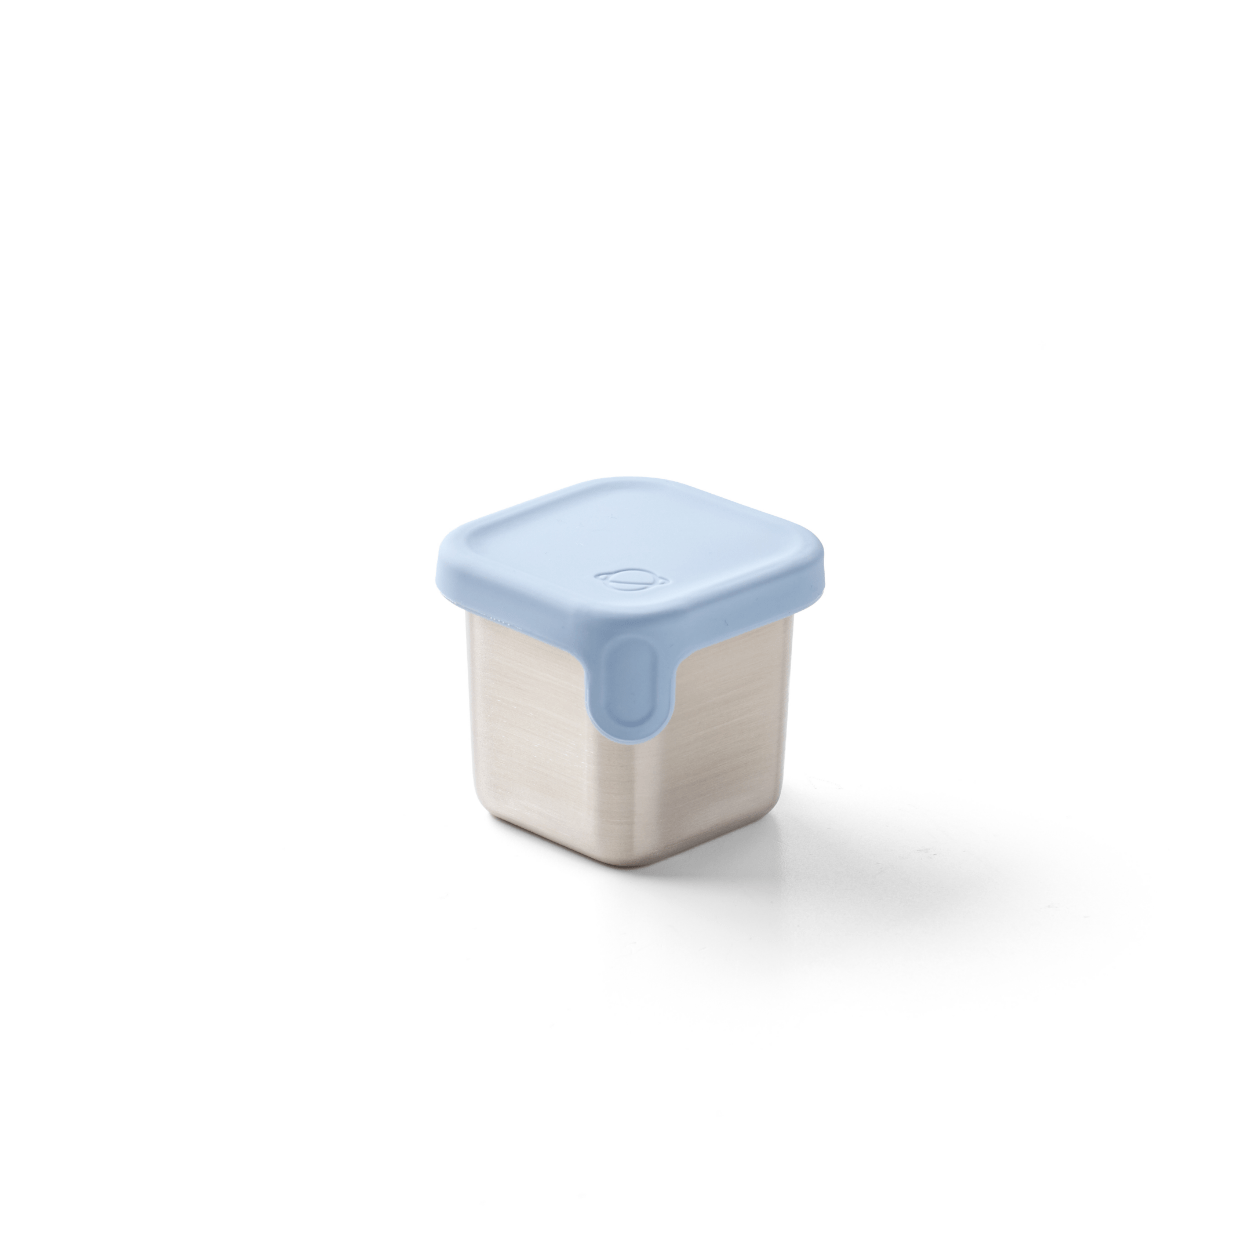 Little Square Dipper (2.4oz) for PlanetBox Launch : Cloudy Day